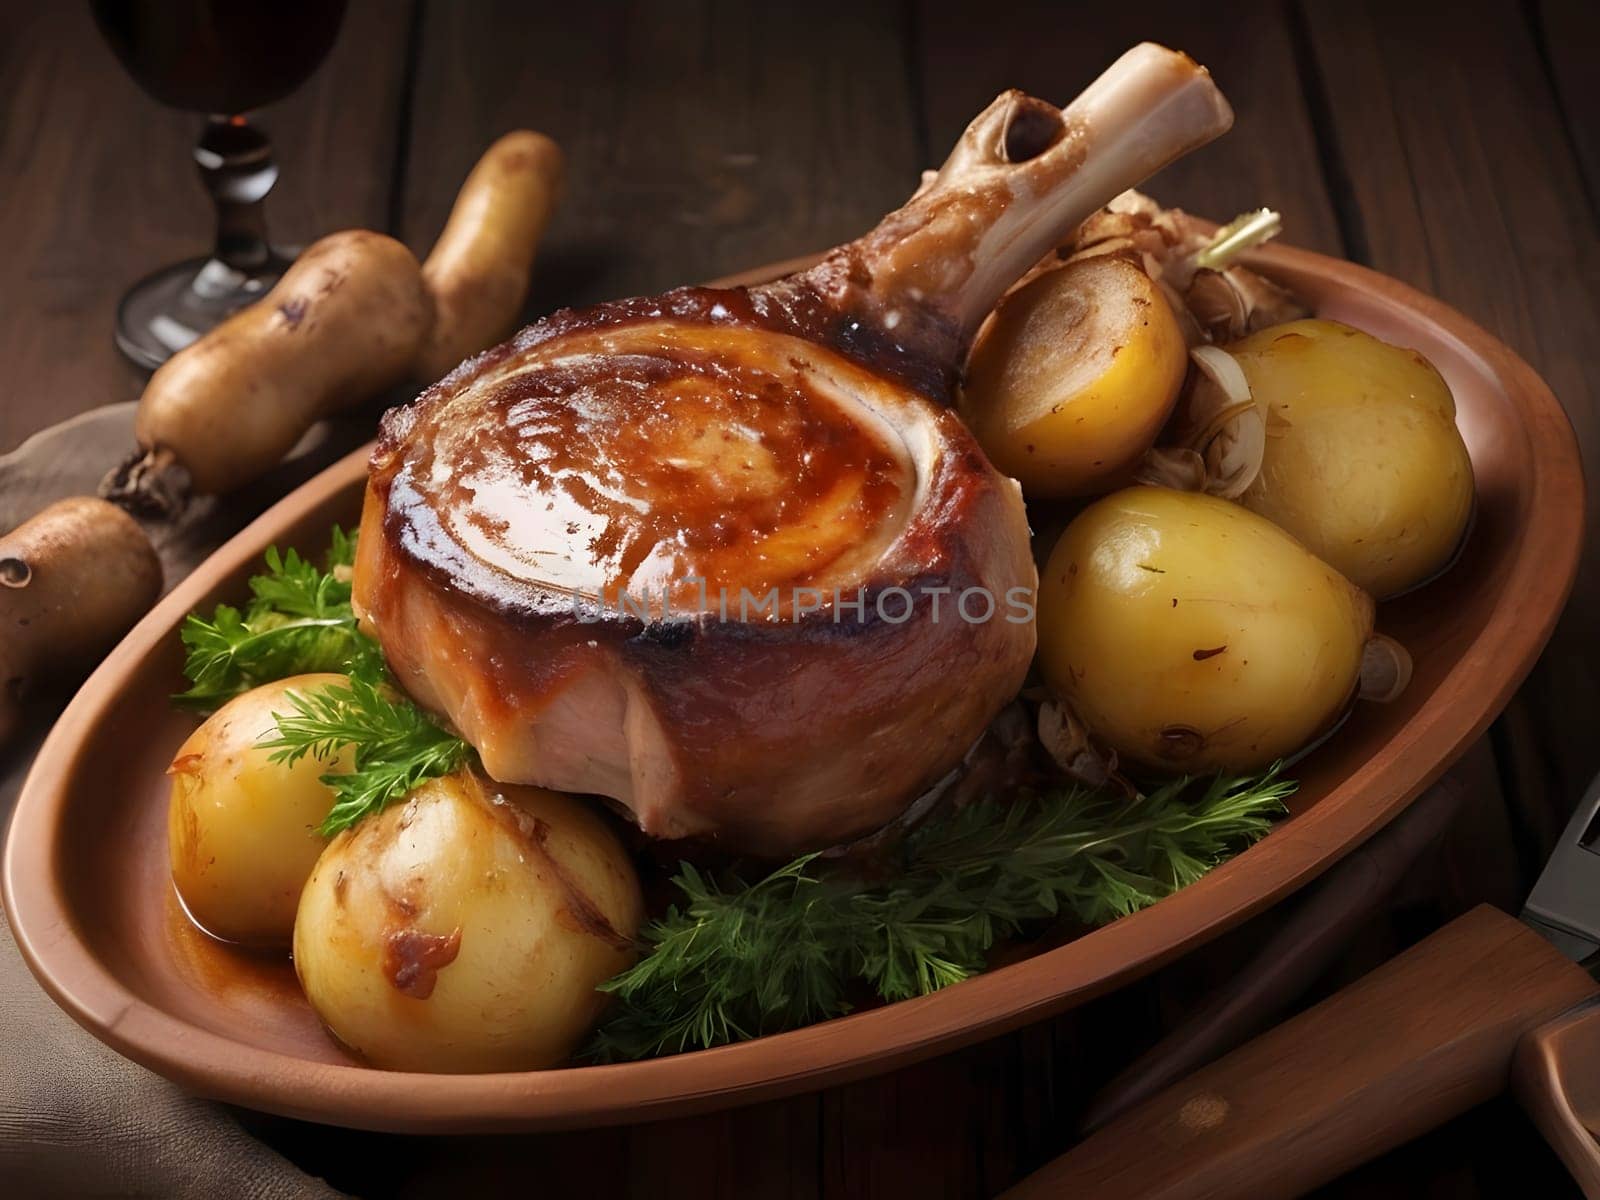 Succulent Haxe Delight: Savoring Baked or Grilled Pork Shank Perfection.